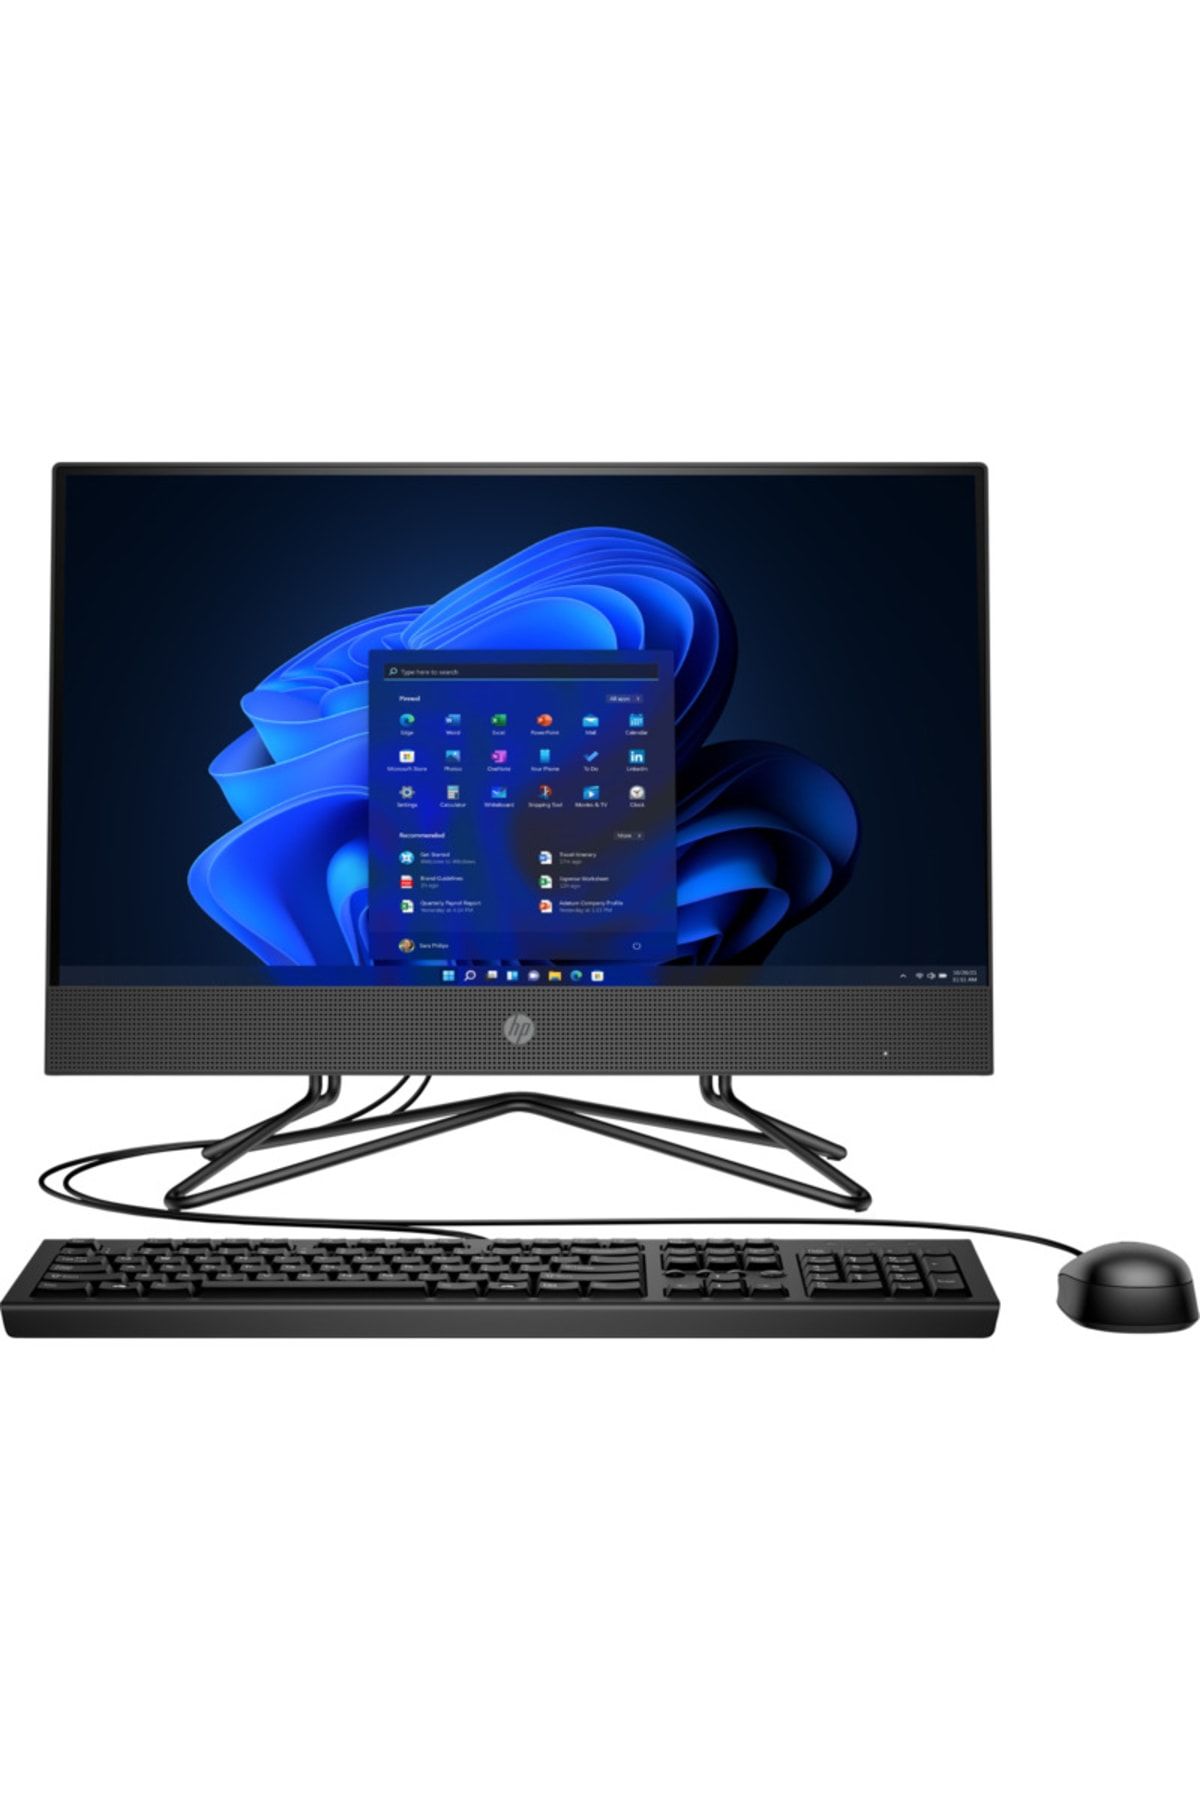 HP 200 G4 I3-10110u 16 Gb 256 Gb M.2 Fdos 295d4ea03 Uhd Graphics 21.5'' Fhd All In One Pc